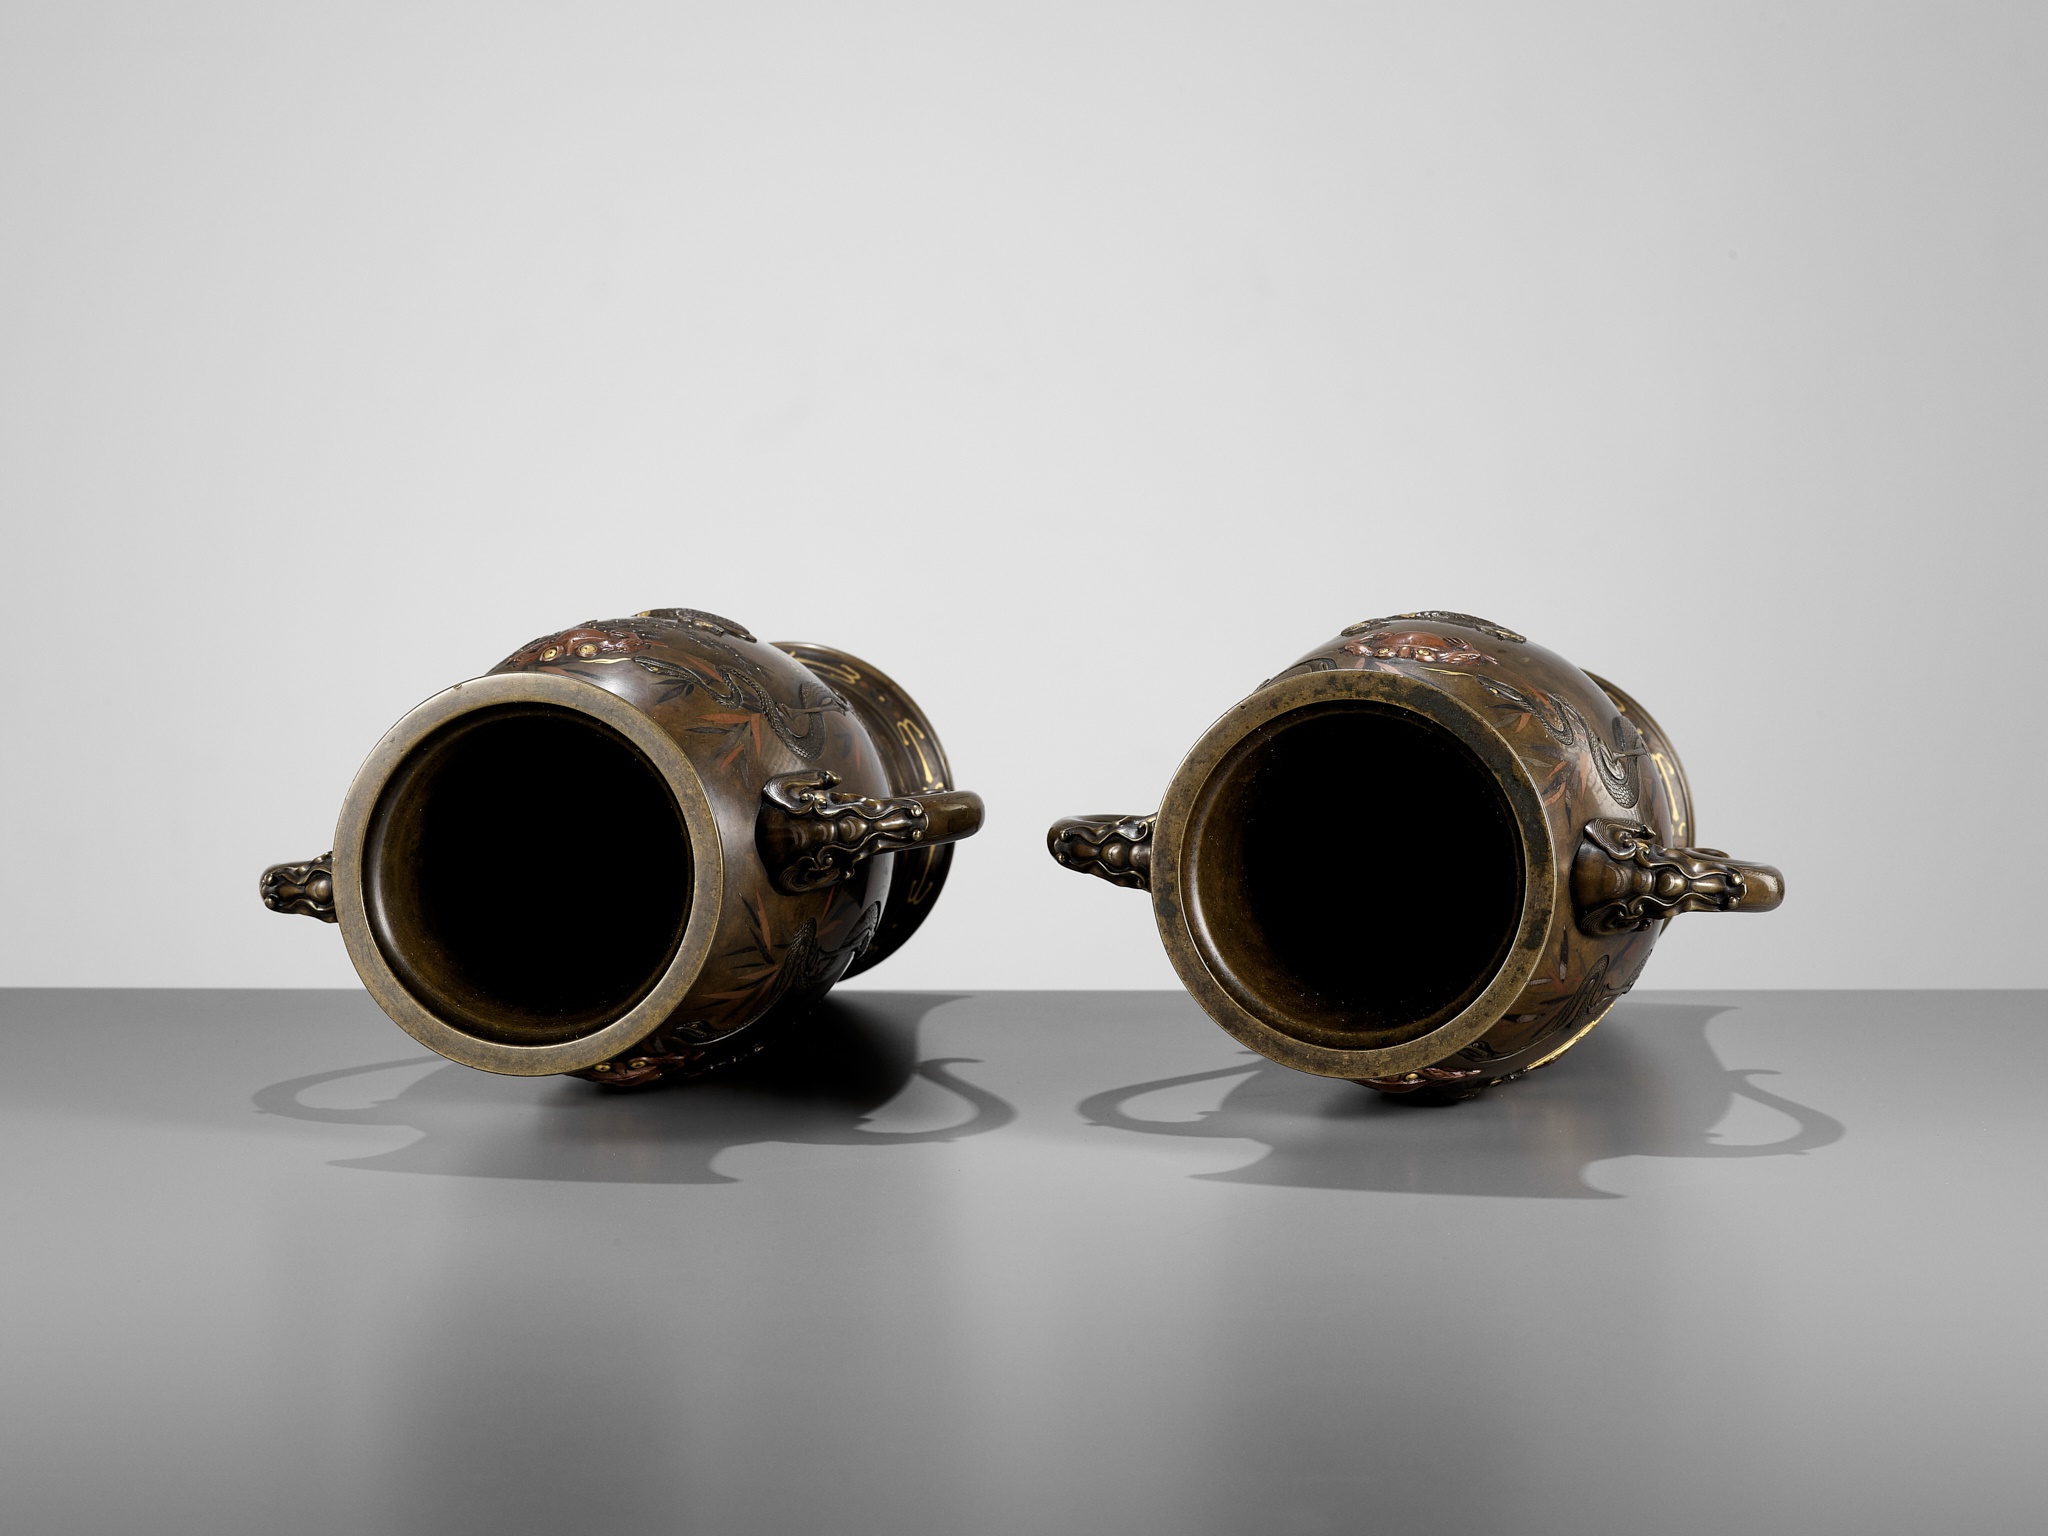 A SUPERB PAIR OF MIYAO-STYLE MIXED-METAL-INLAID AND PARCEL-GILT BRONZE VASES WITH SHOKI AND ONI - Image 14 of 15